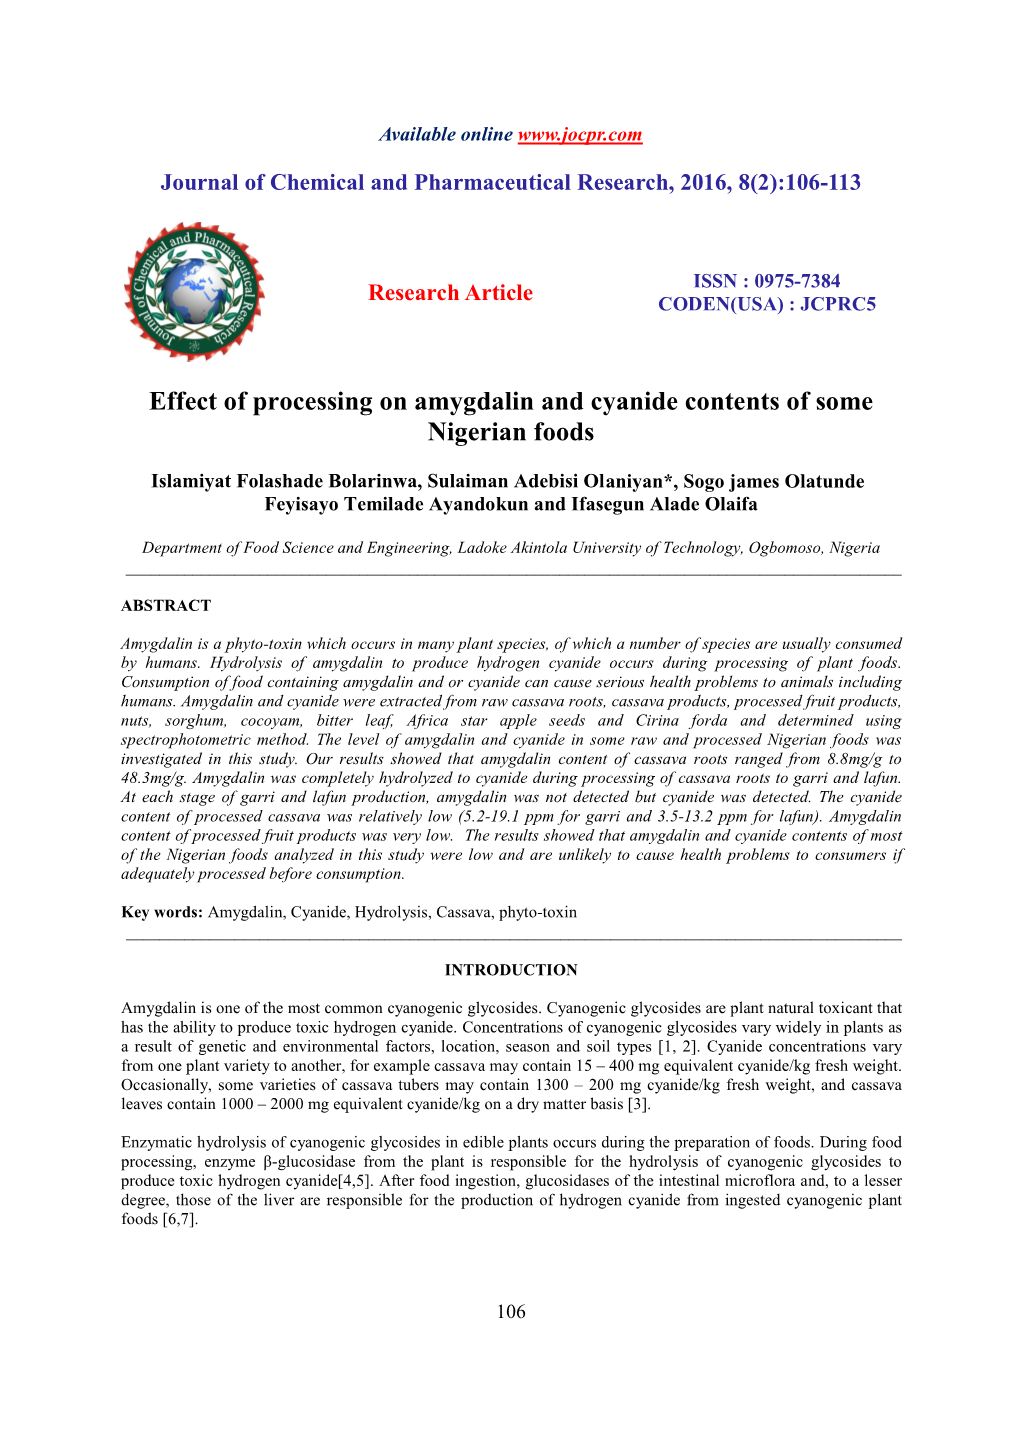 Effect of Processing on Amygdalin and Cyanide Contents of Some Nigerian Foods